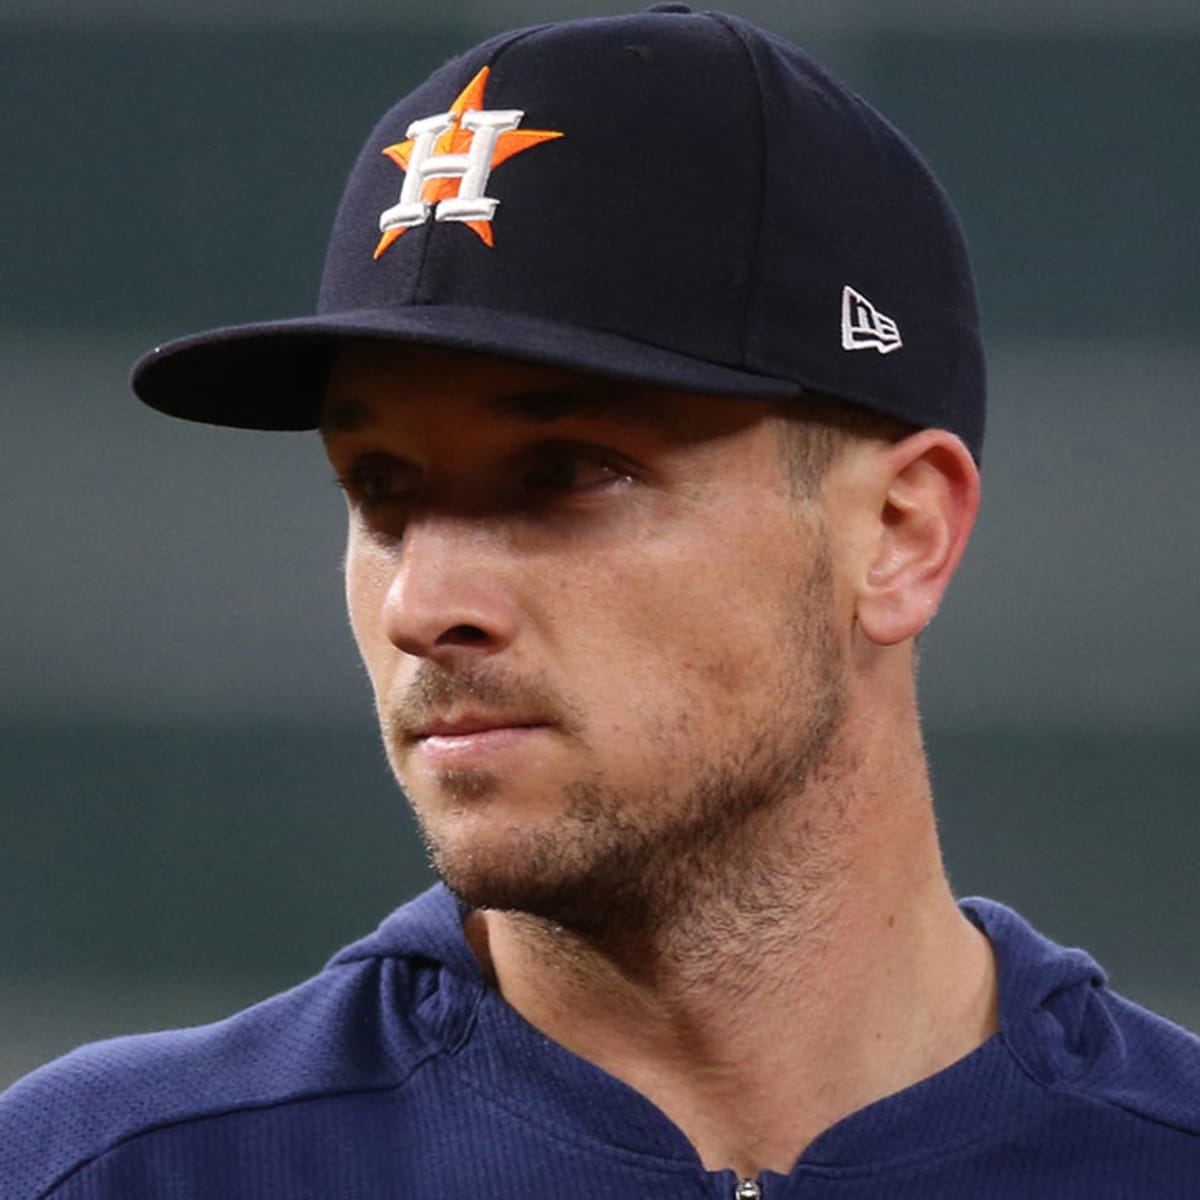 Rangers intentionally balked Astros' Alex Bregman to prevent sign stealing